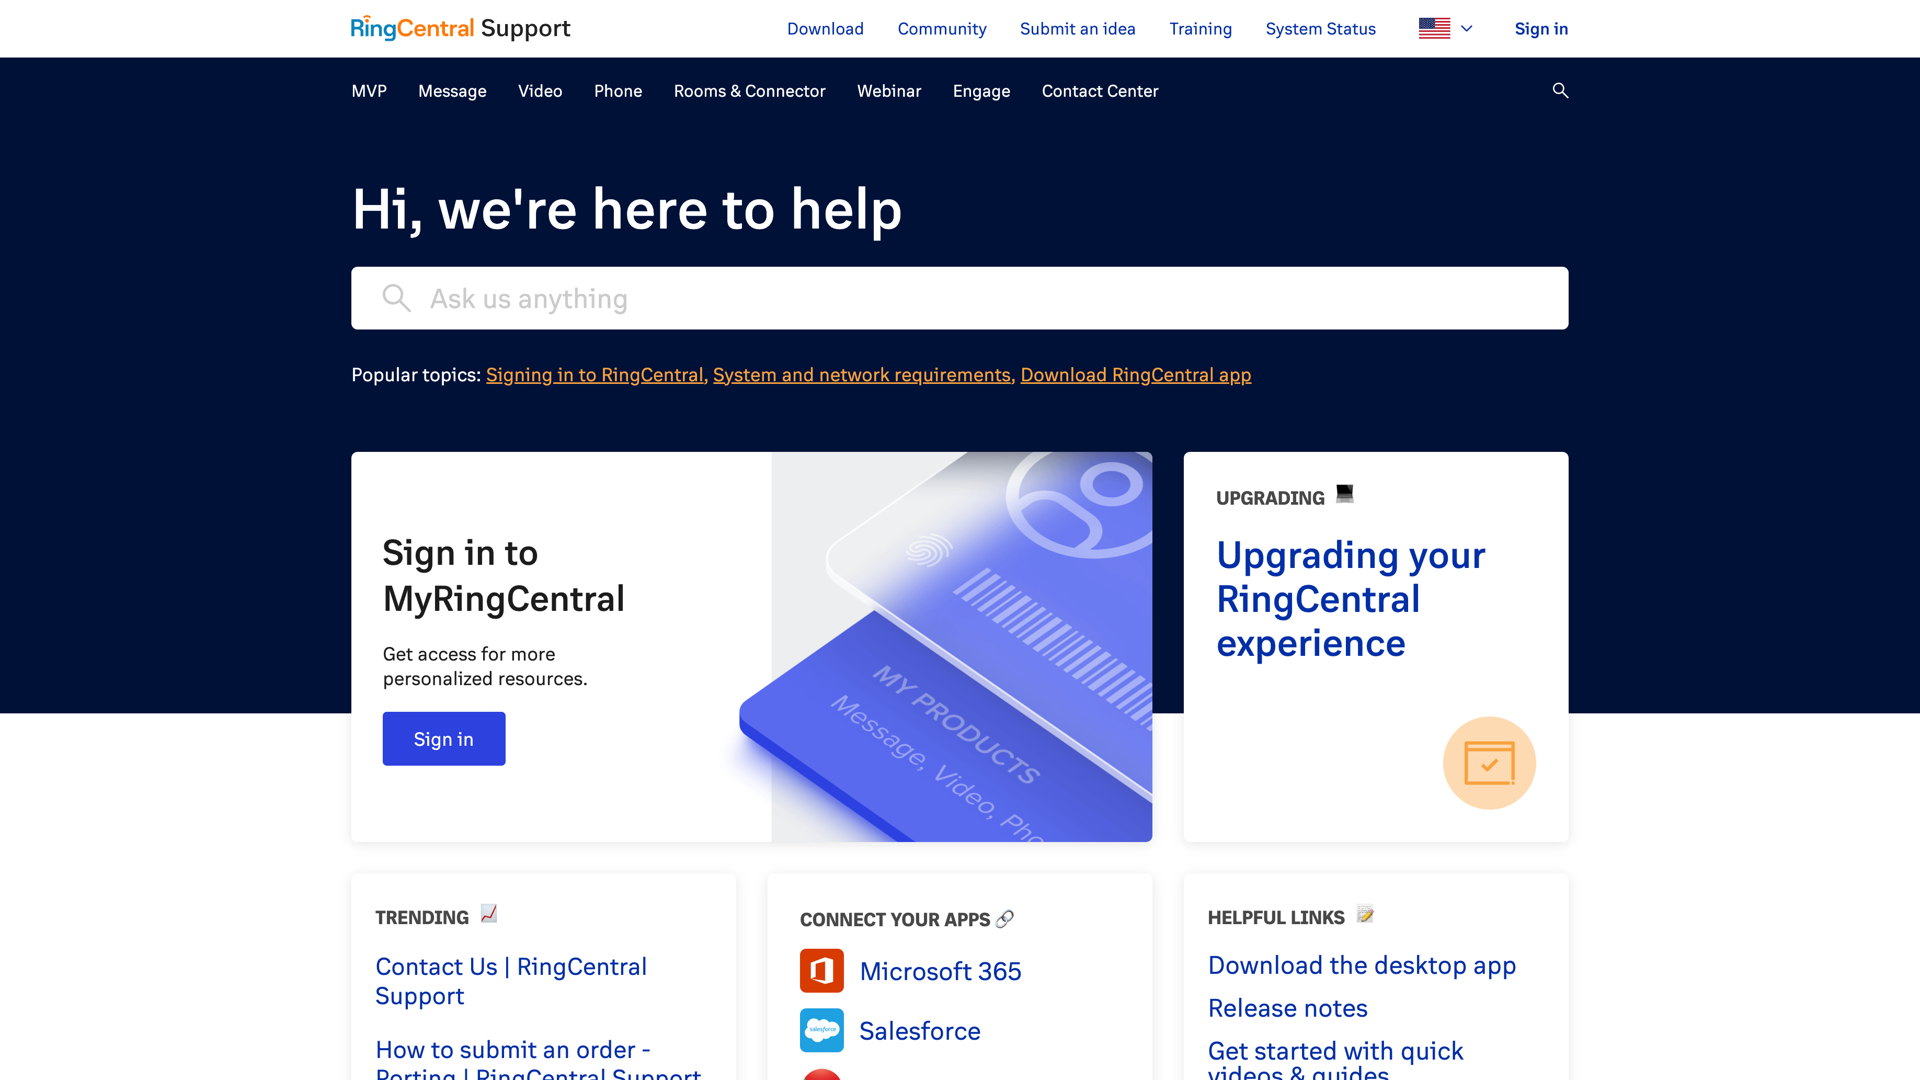 RingCentral Support October 2022